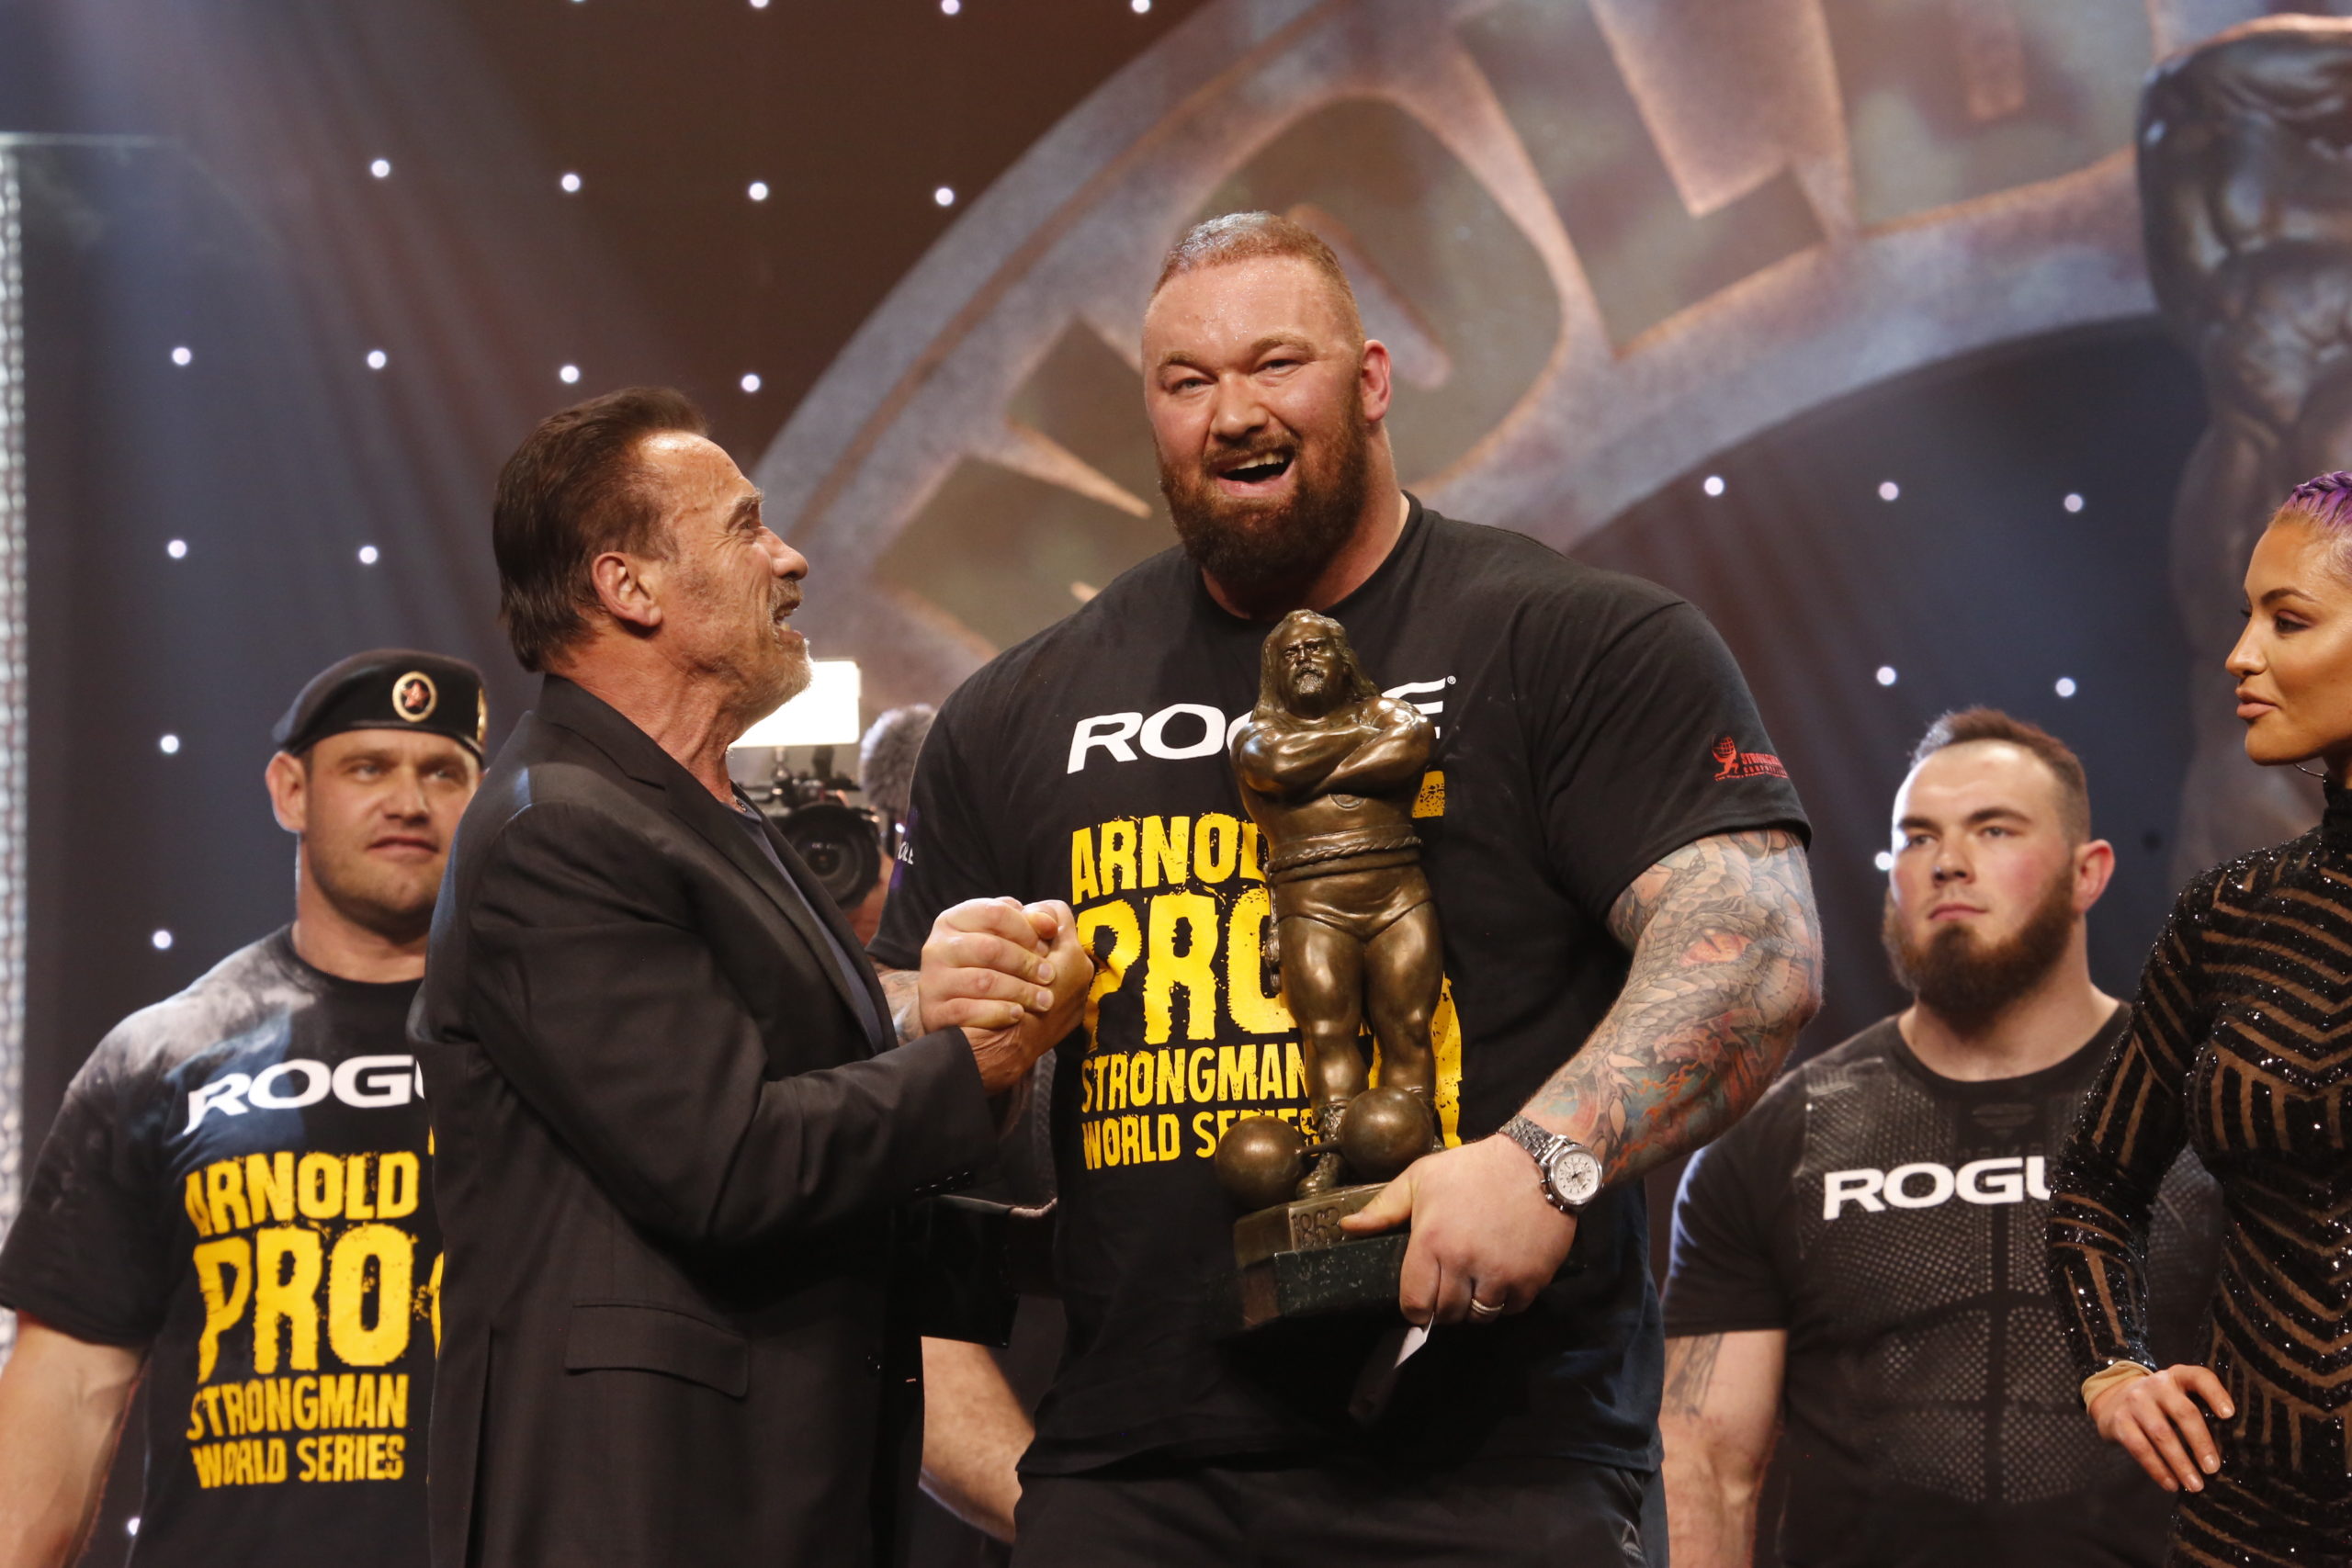 Hafthor Bjornsson wins The Arnold Strongman Classic with Gov. Arnold Schwarzenegger Photo by Dave Emery